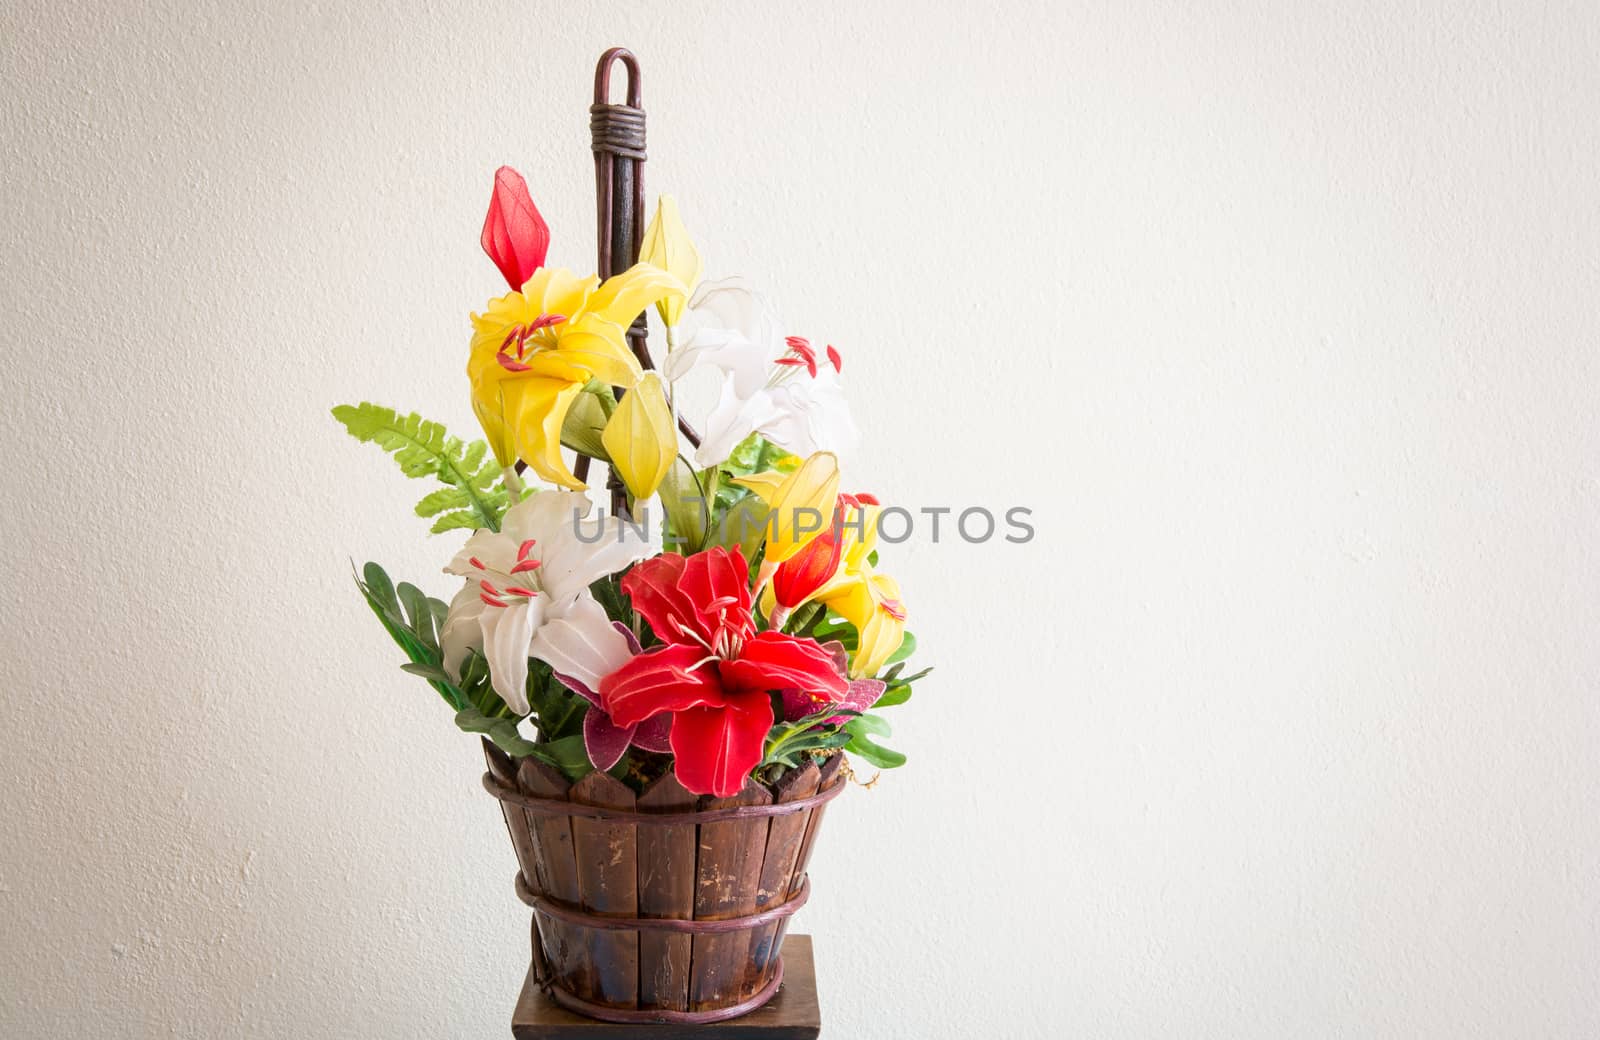 the colouful flowers with green leaves in the wooden jar